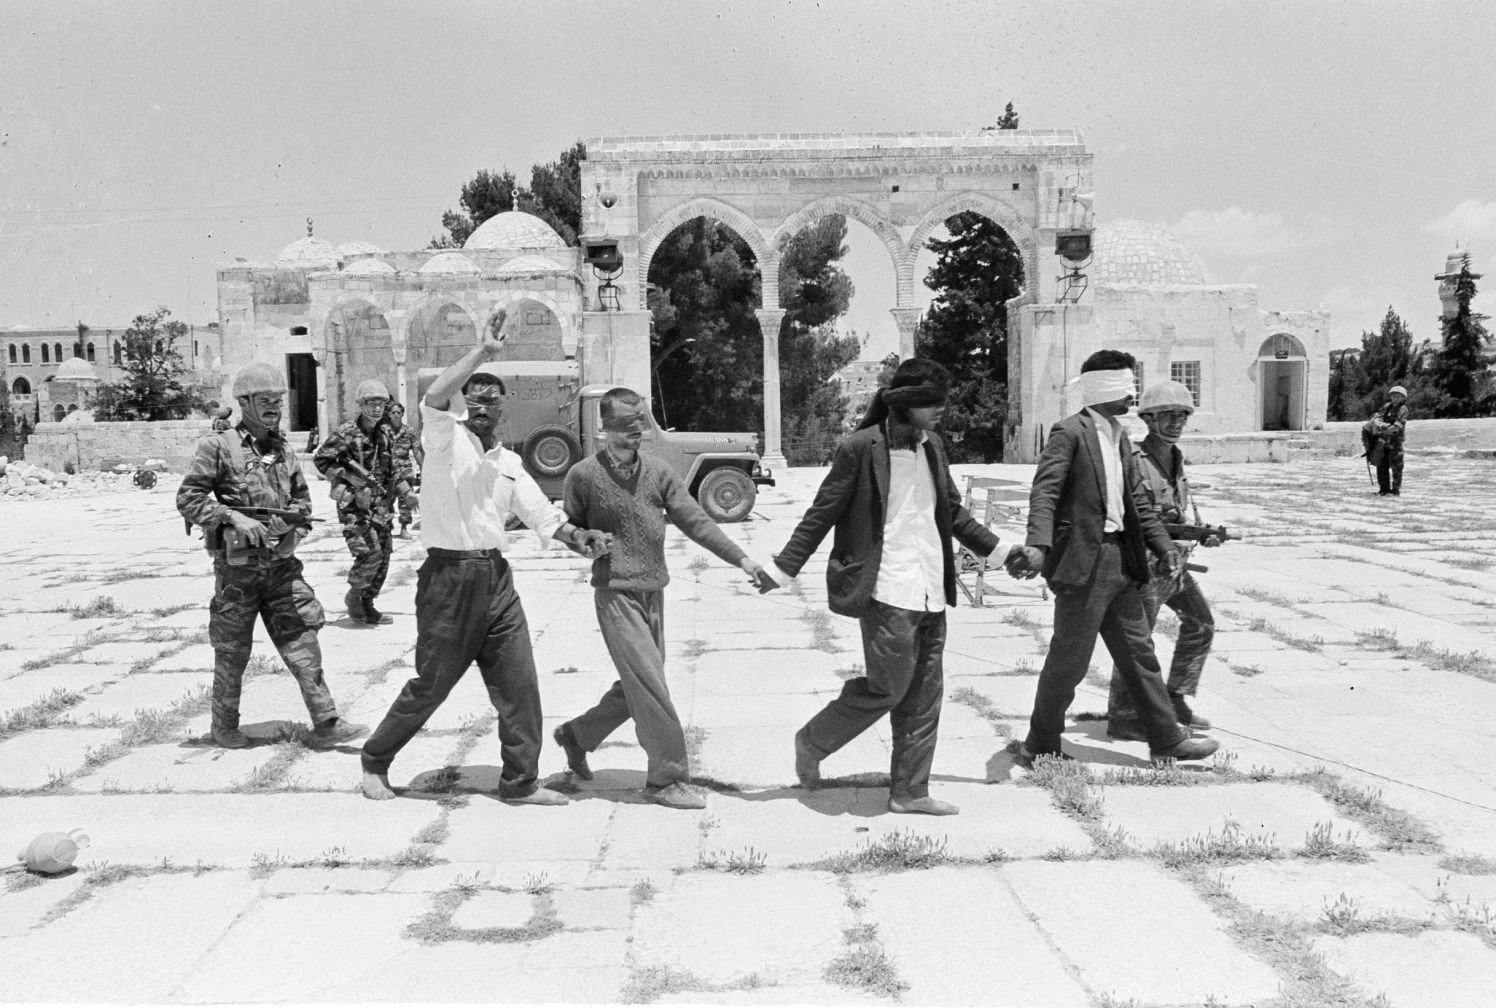 Arabs are led blindfolded to interrogation by Israeli soldiers in the old city of Jerusalem, June 8, 1967. (AP Photo)